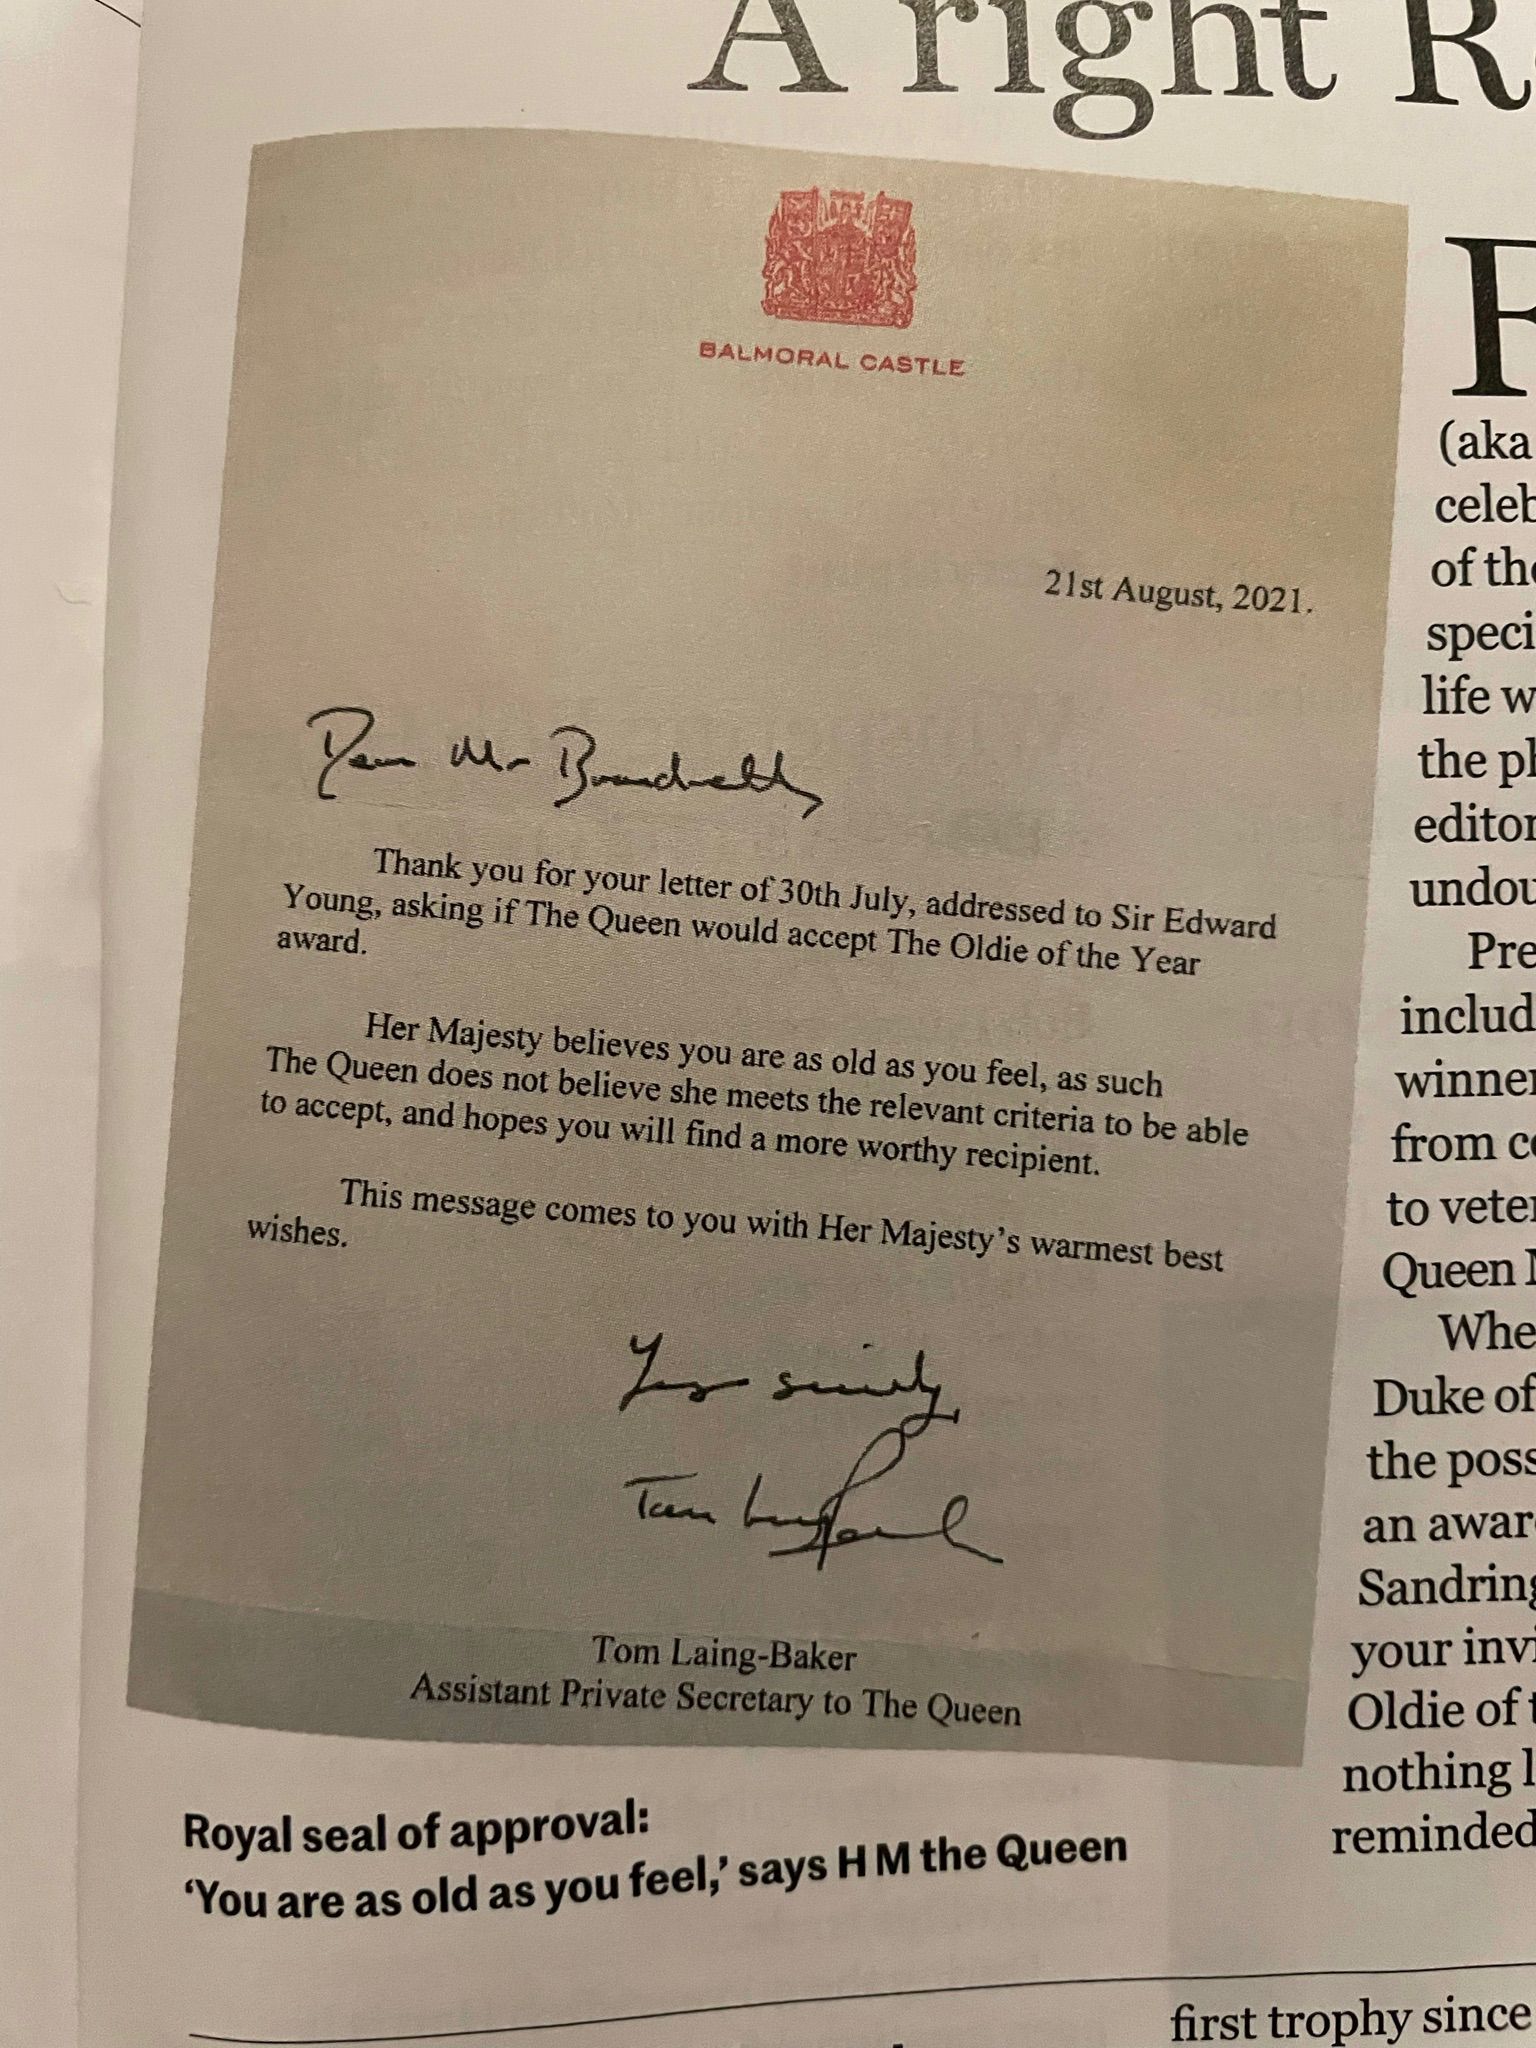 The letter from the Queen's Assistant Private Secretary 